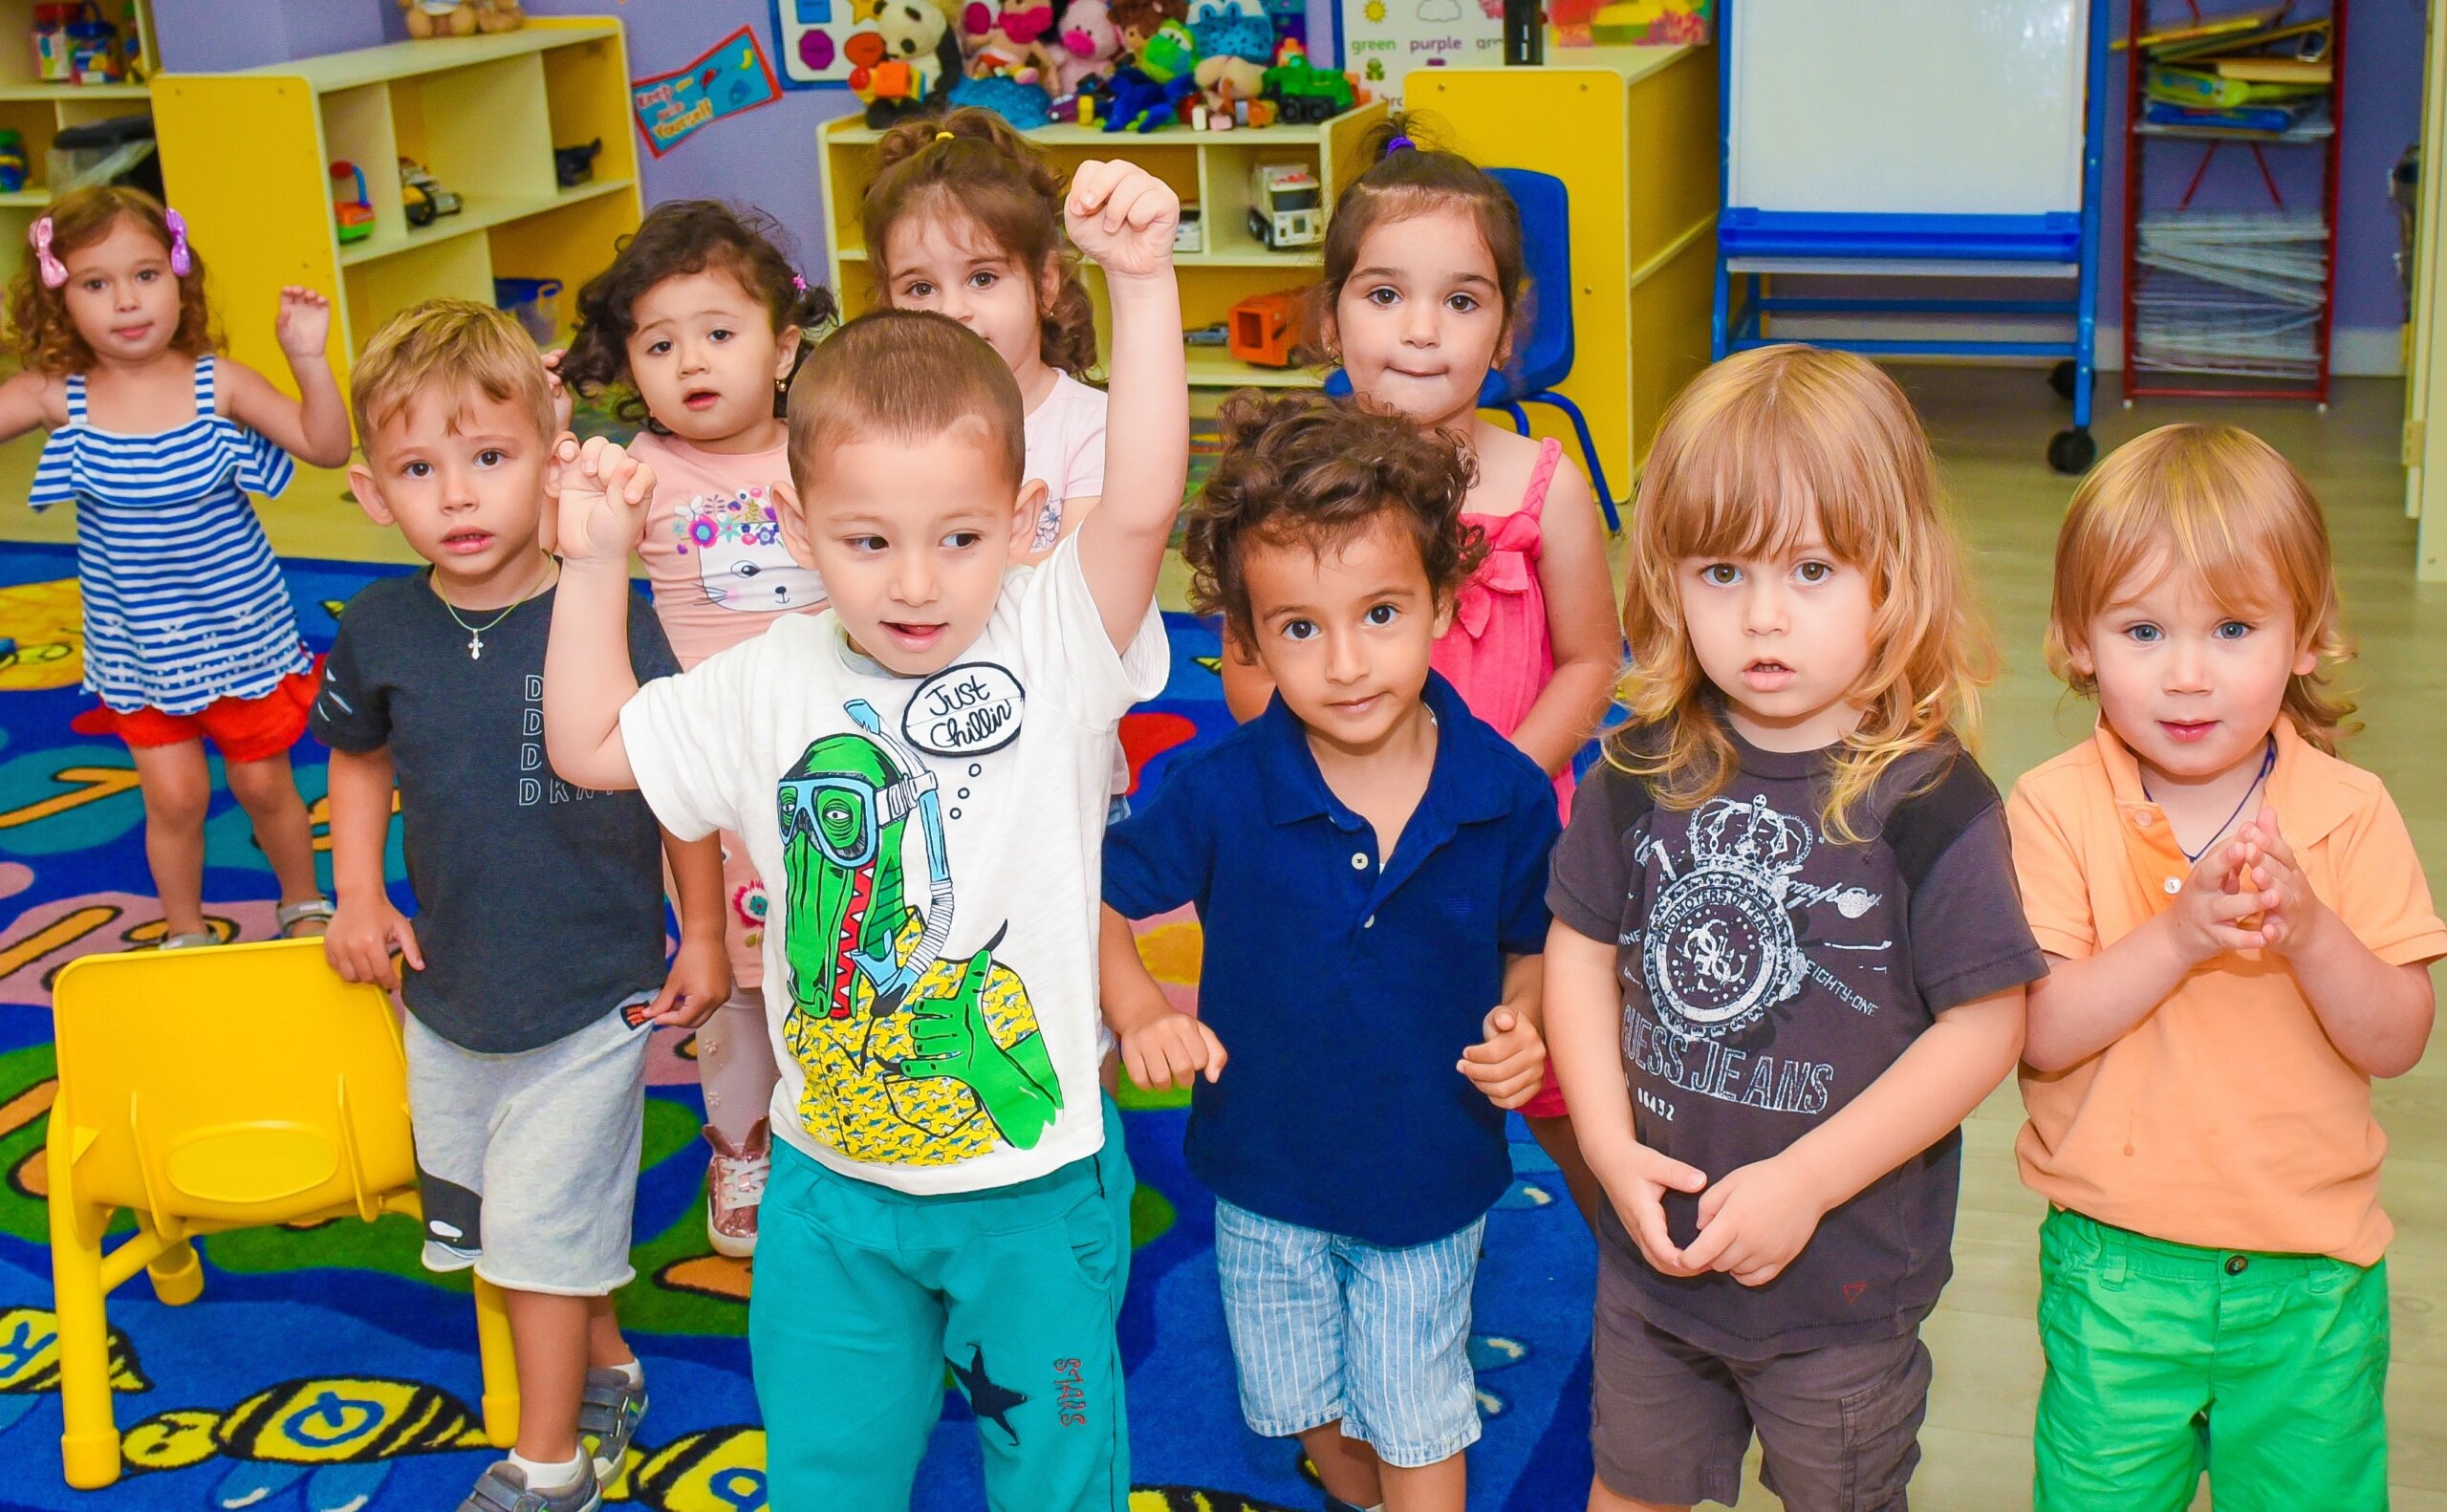 A diverse group of children participating in a social-emotional learning activity at daycare